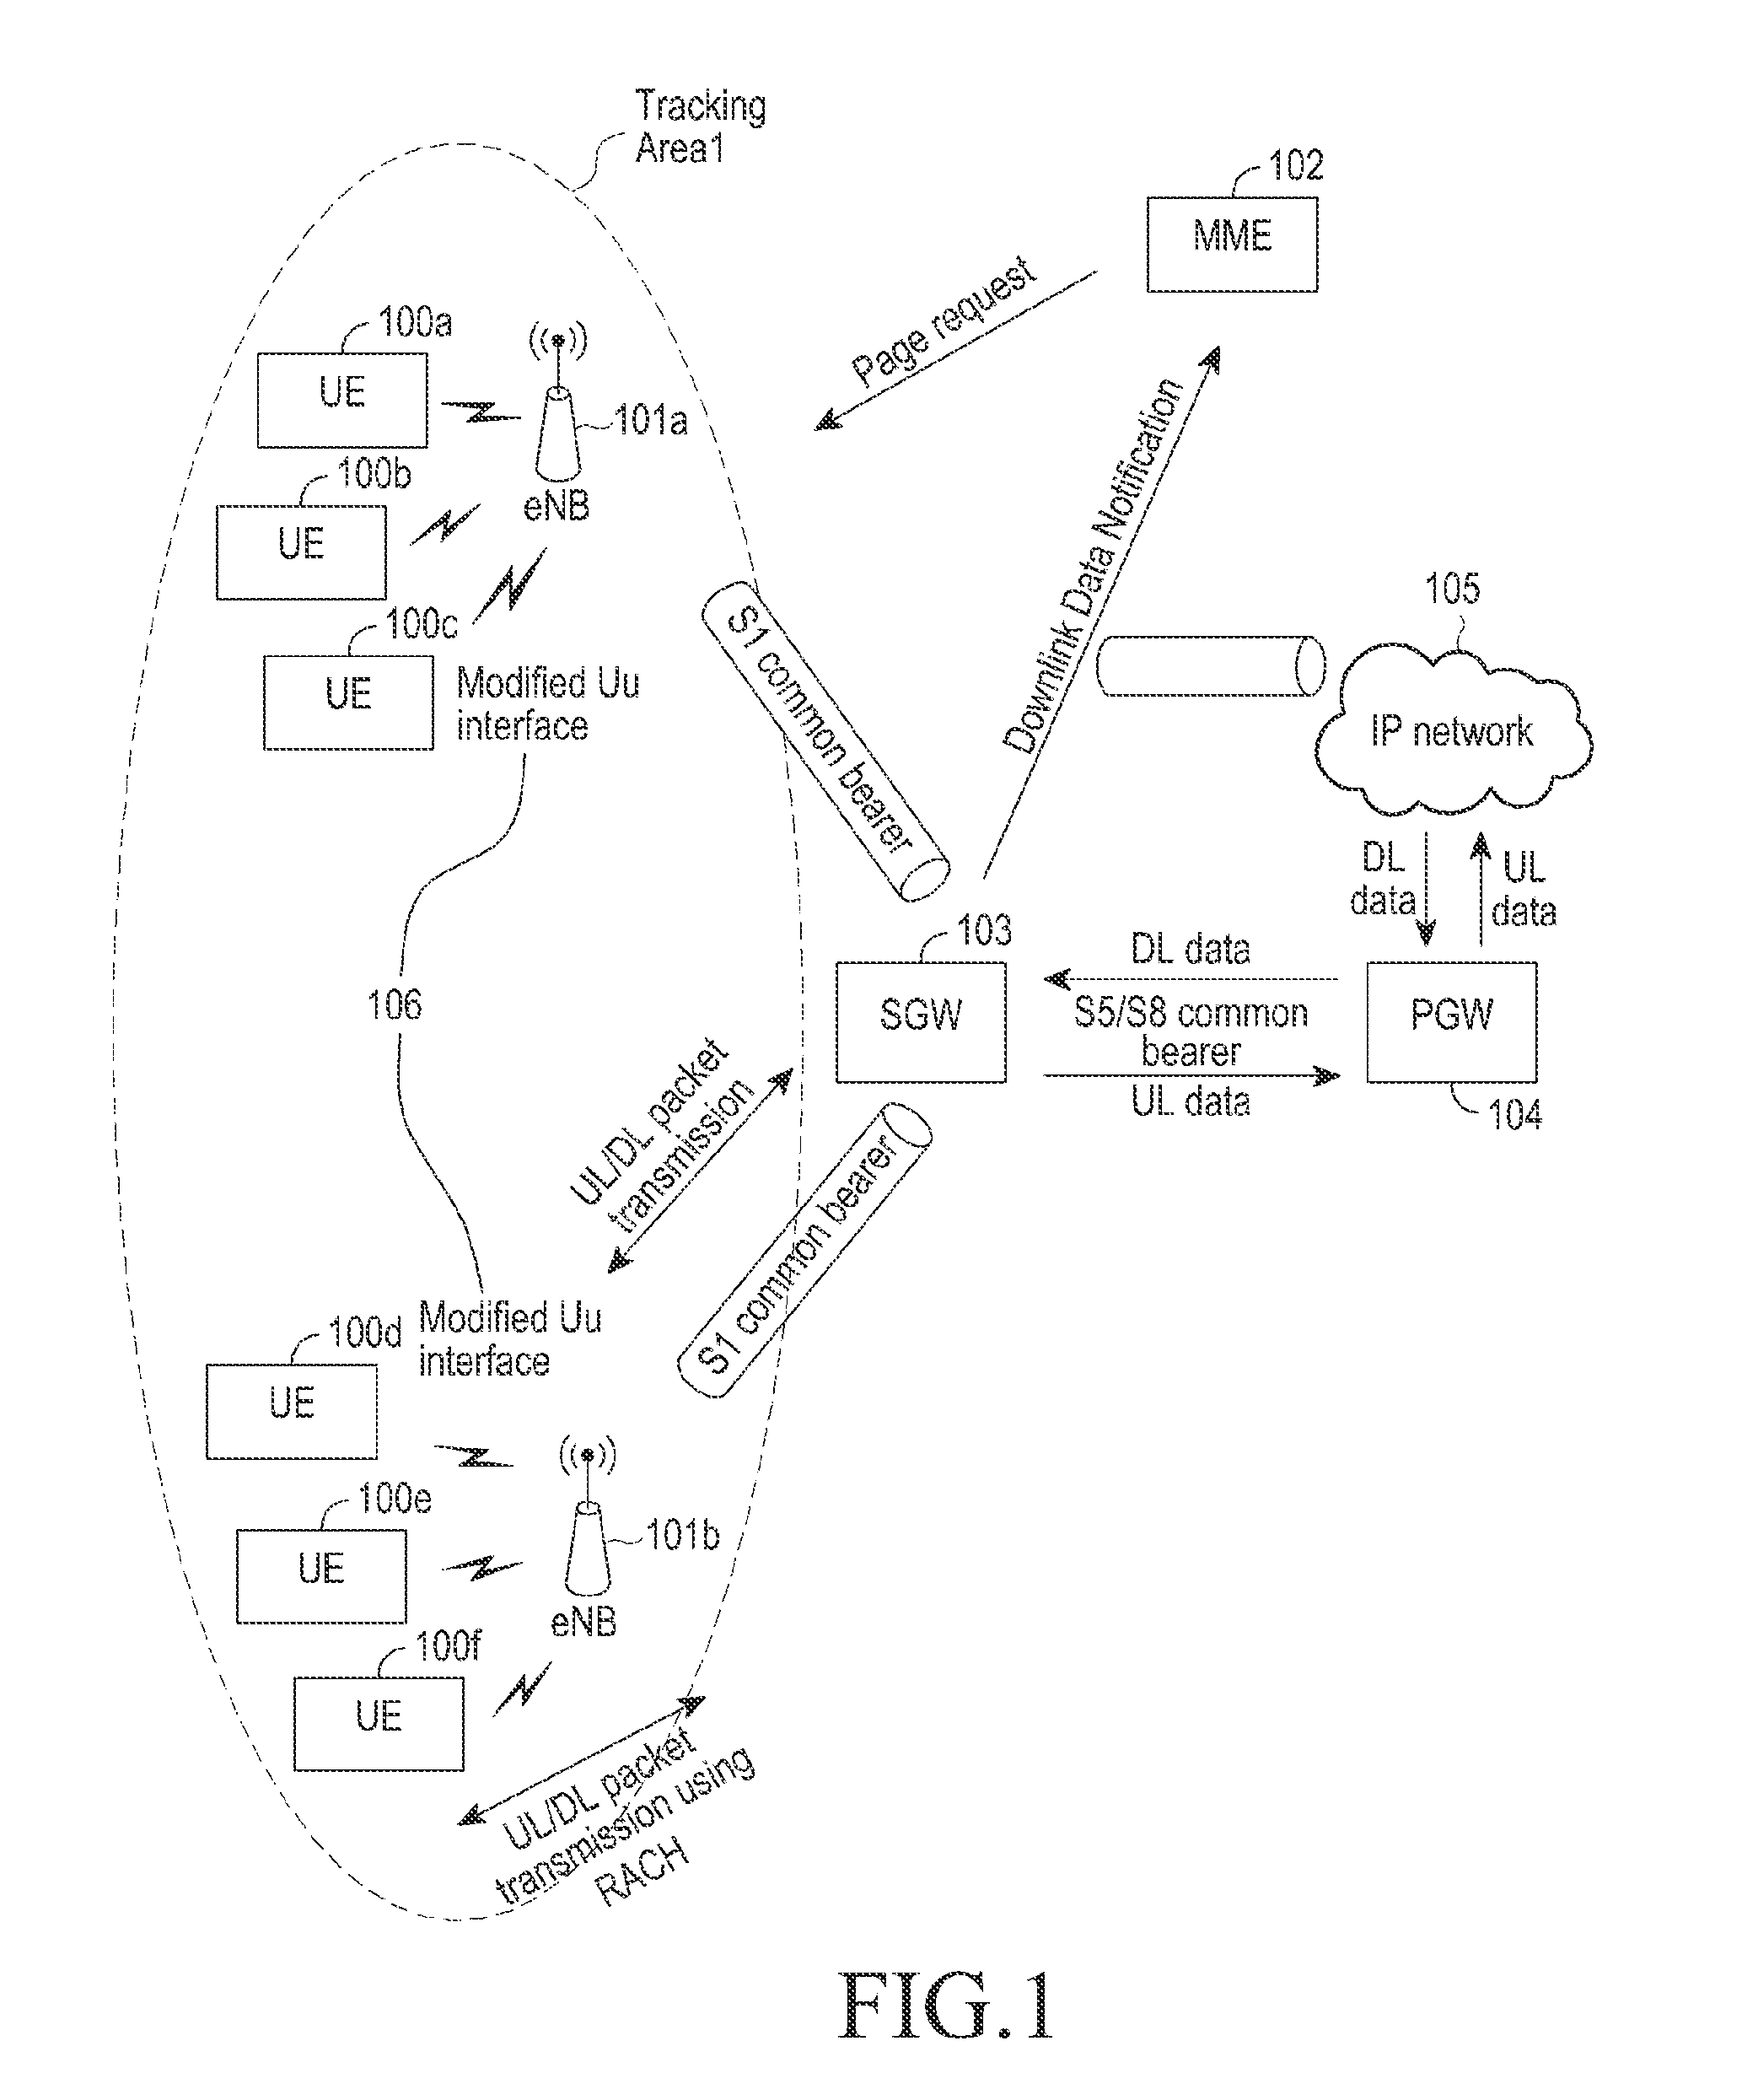 Method and system for connectionless transmission during uplink and downlink of data packets